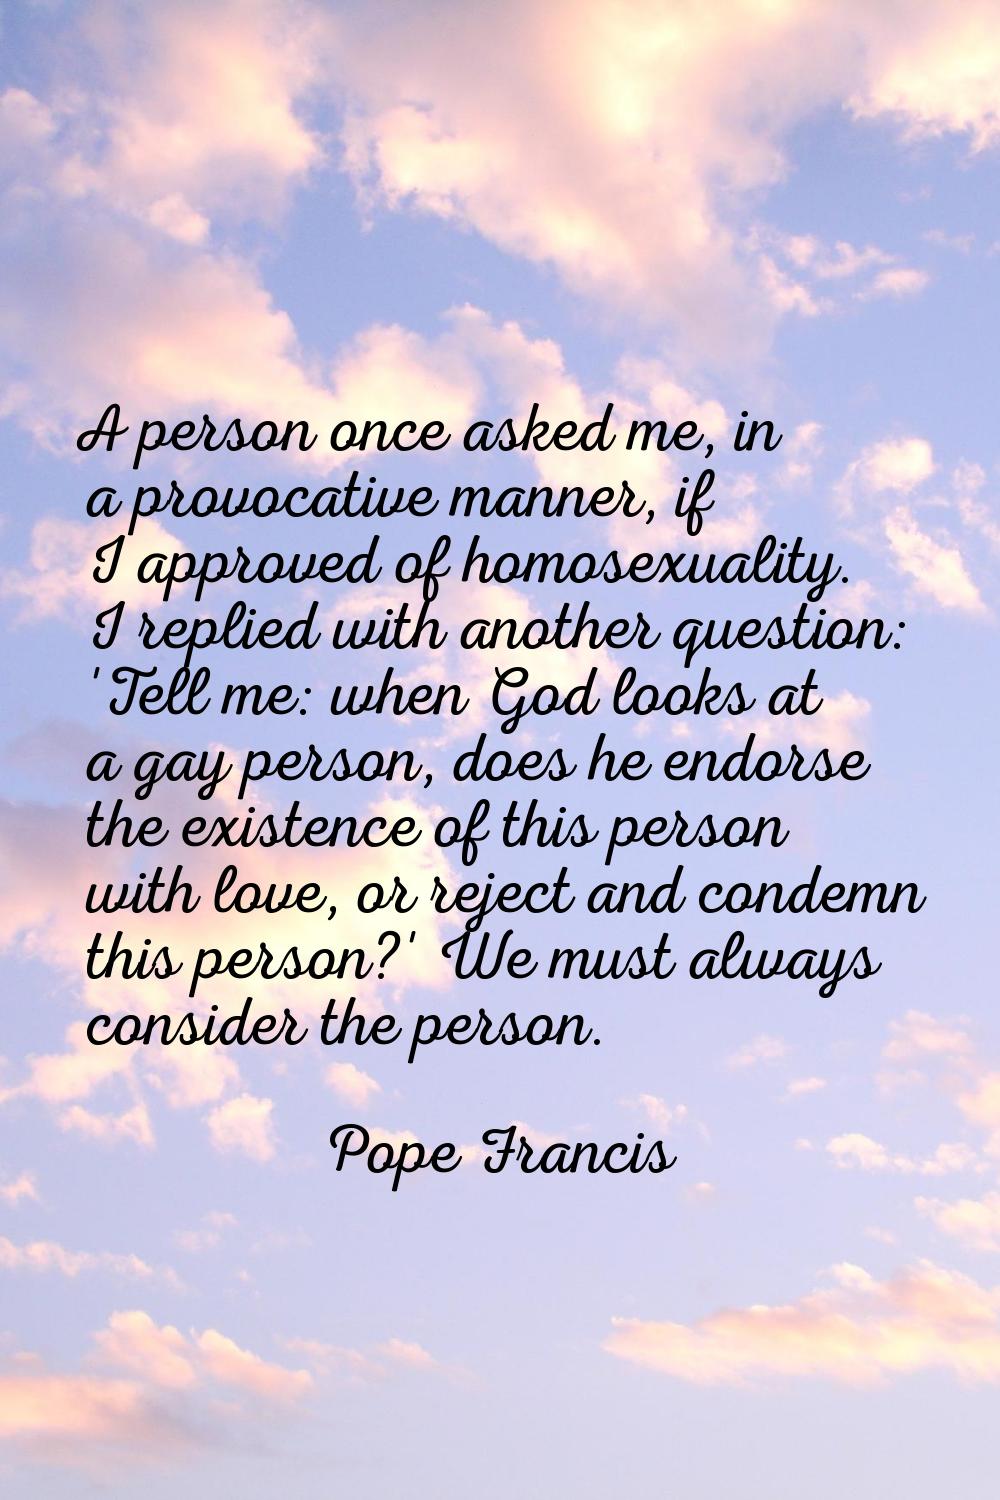 A person once asked me, in a provocative manner, if I approved of homosexuality. I replied with ano